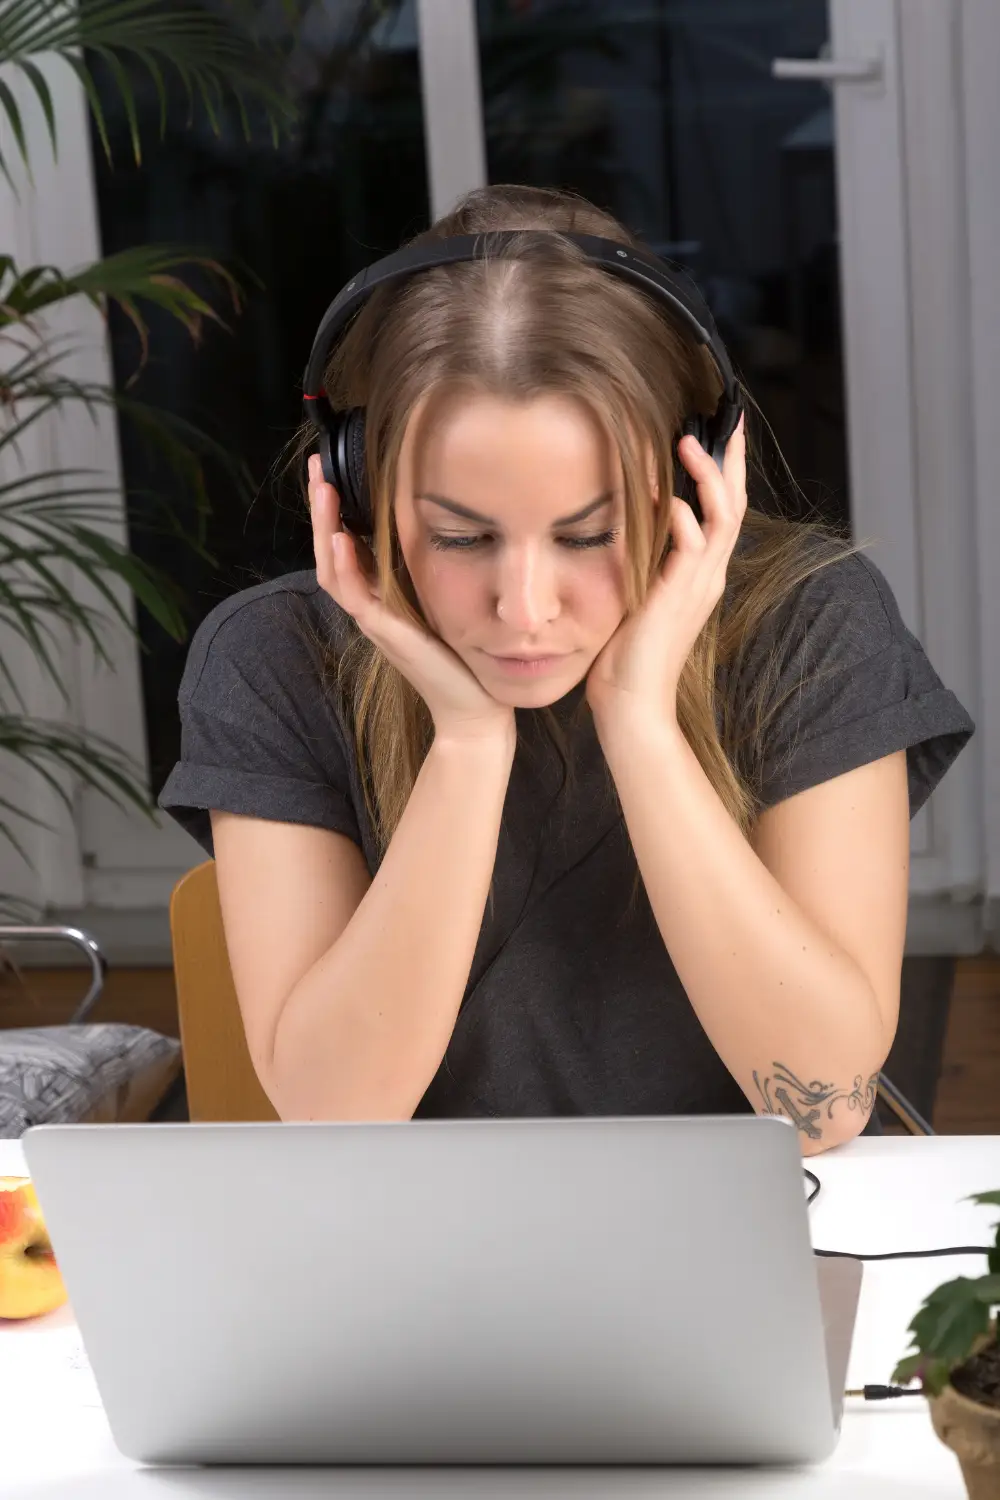 A woman listens to music through headphones while looking at her computer